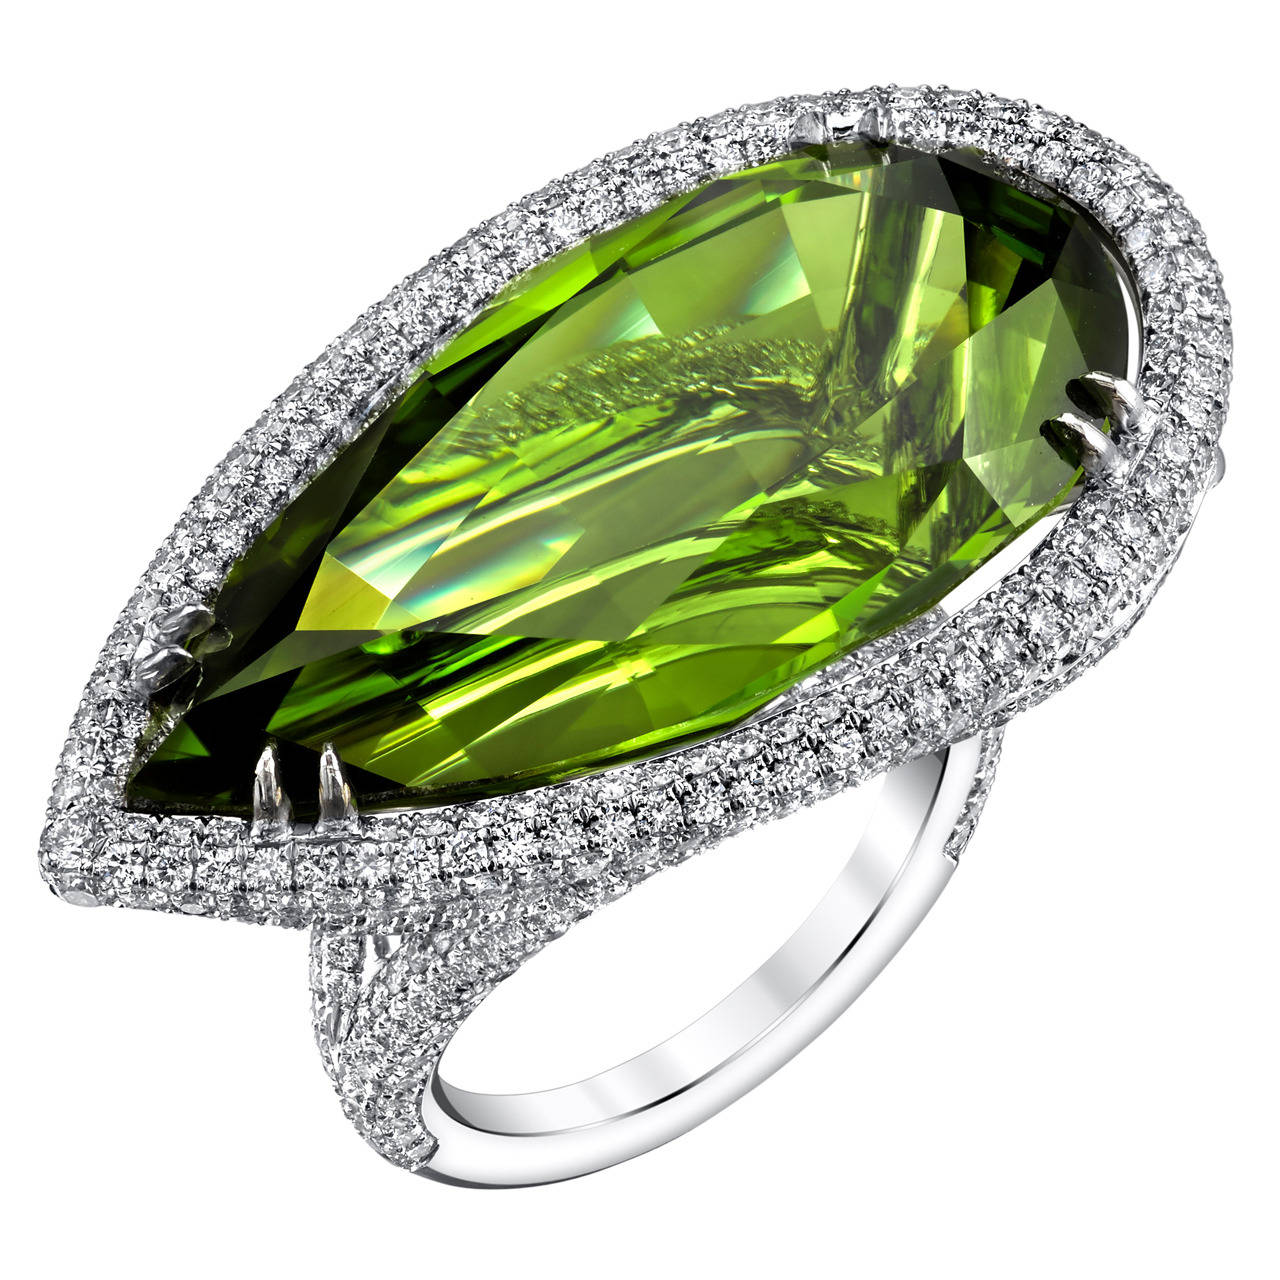 Pear Shaped Peridot Diamond Gold Ring For Sale